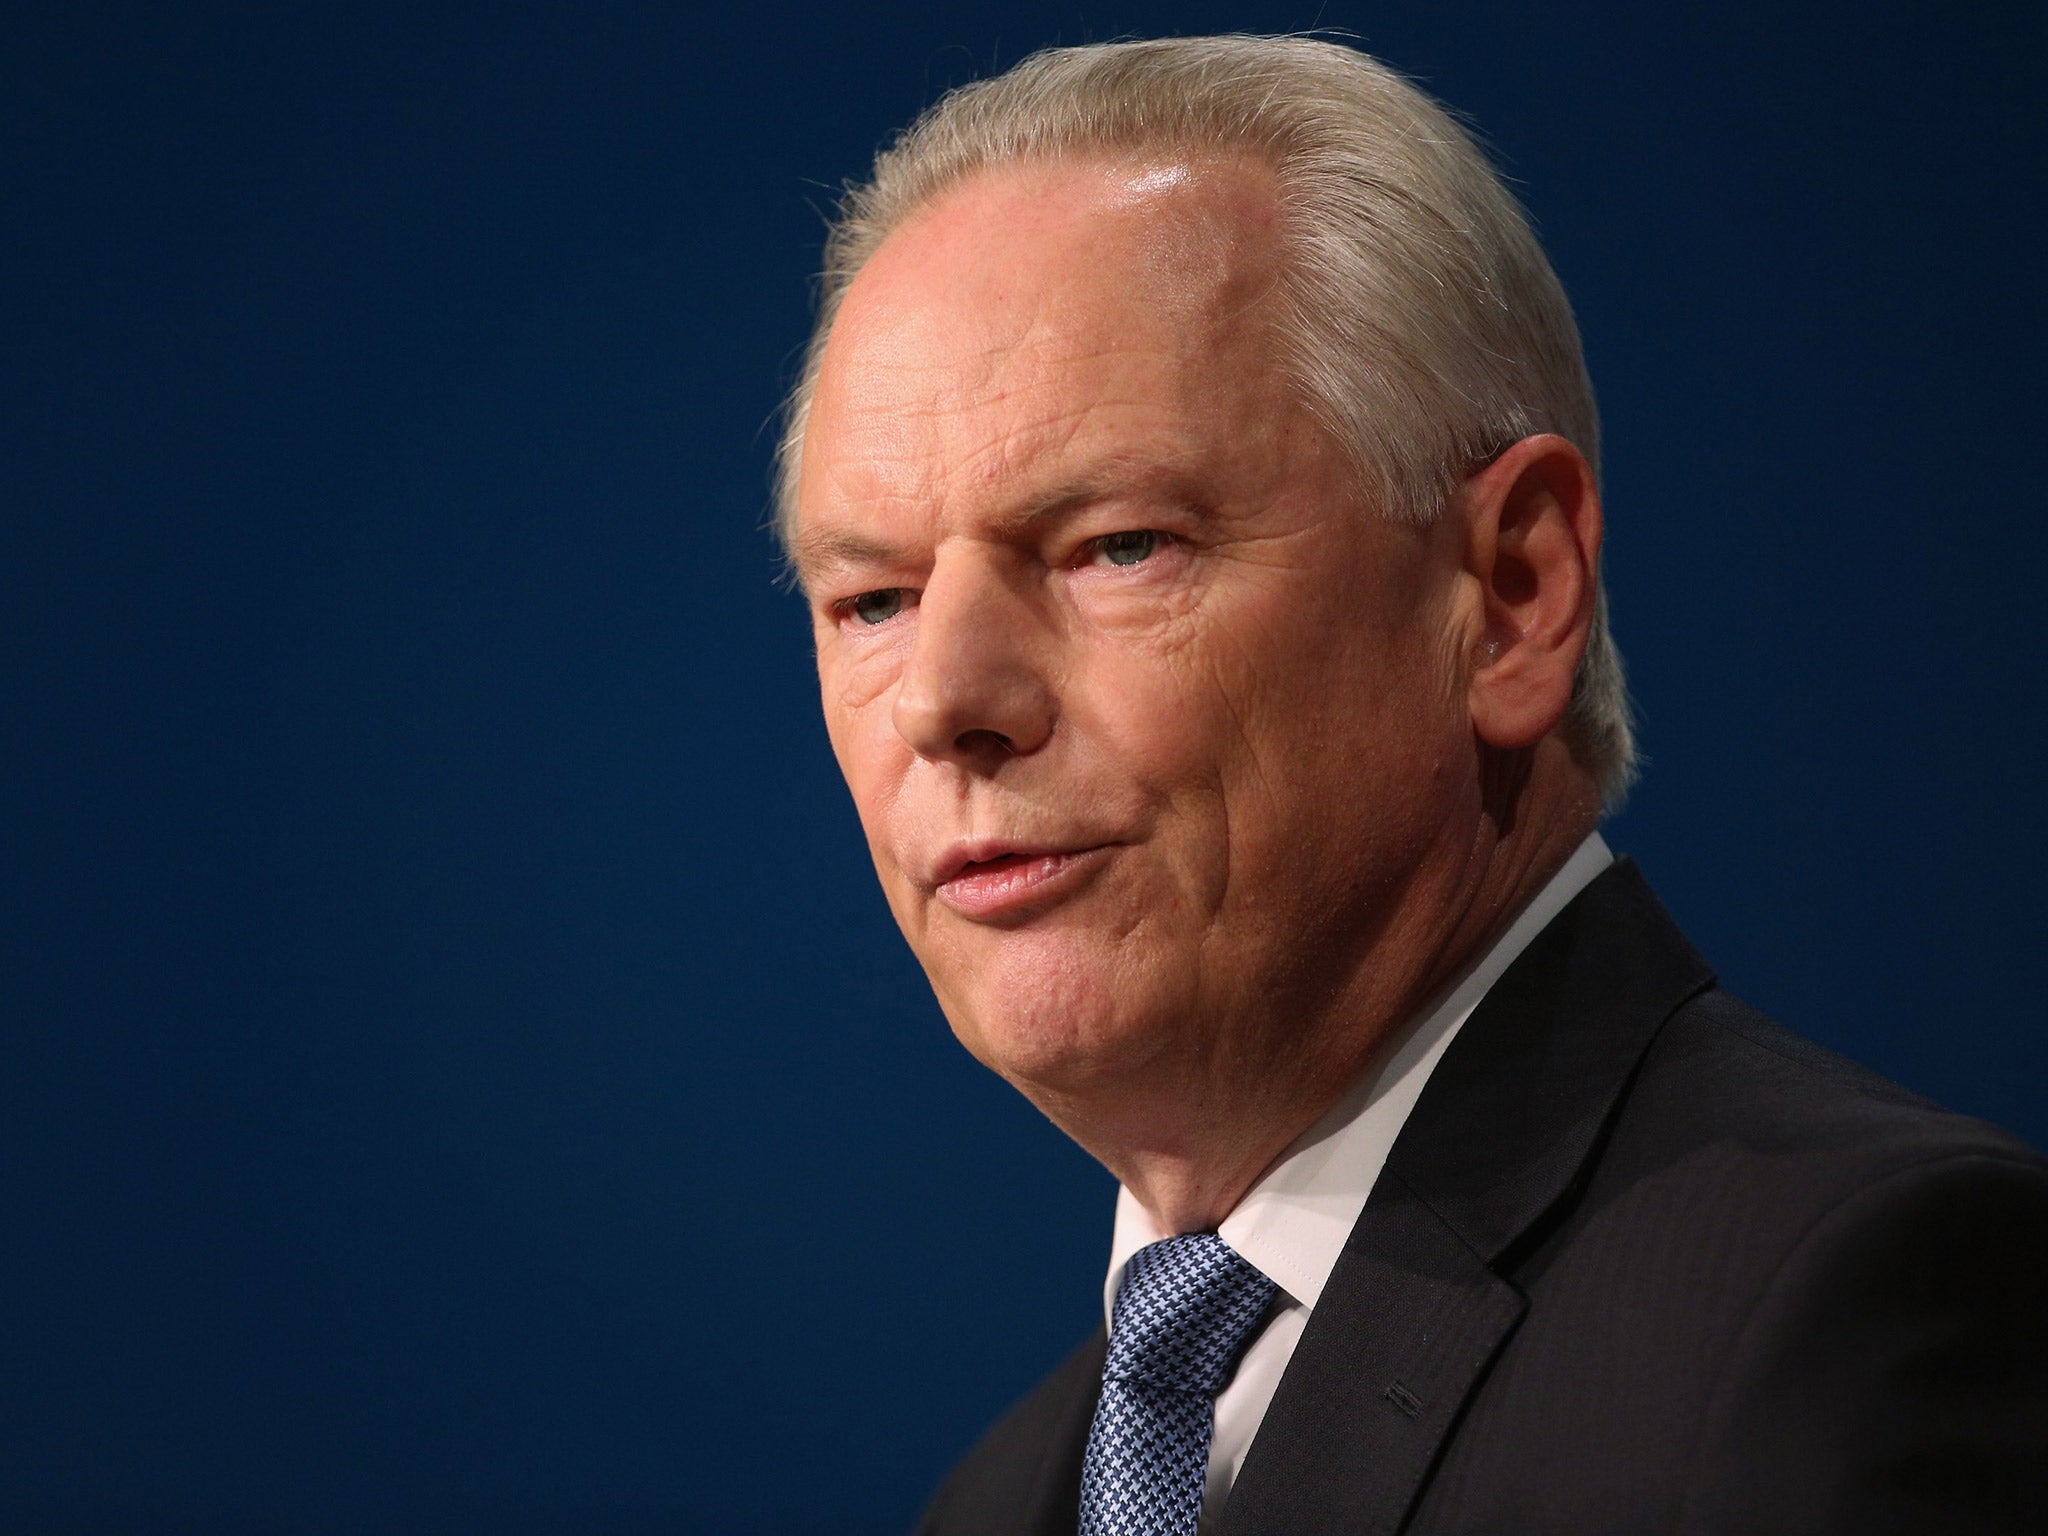 Cabinet Office minister Francis Maude